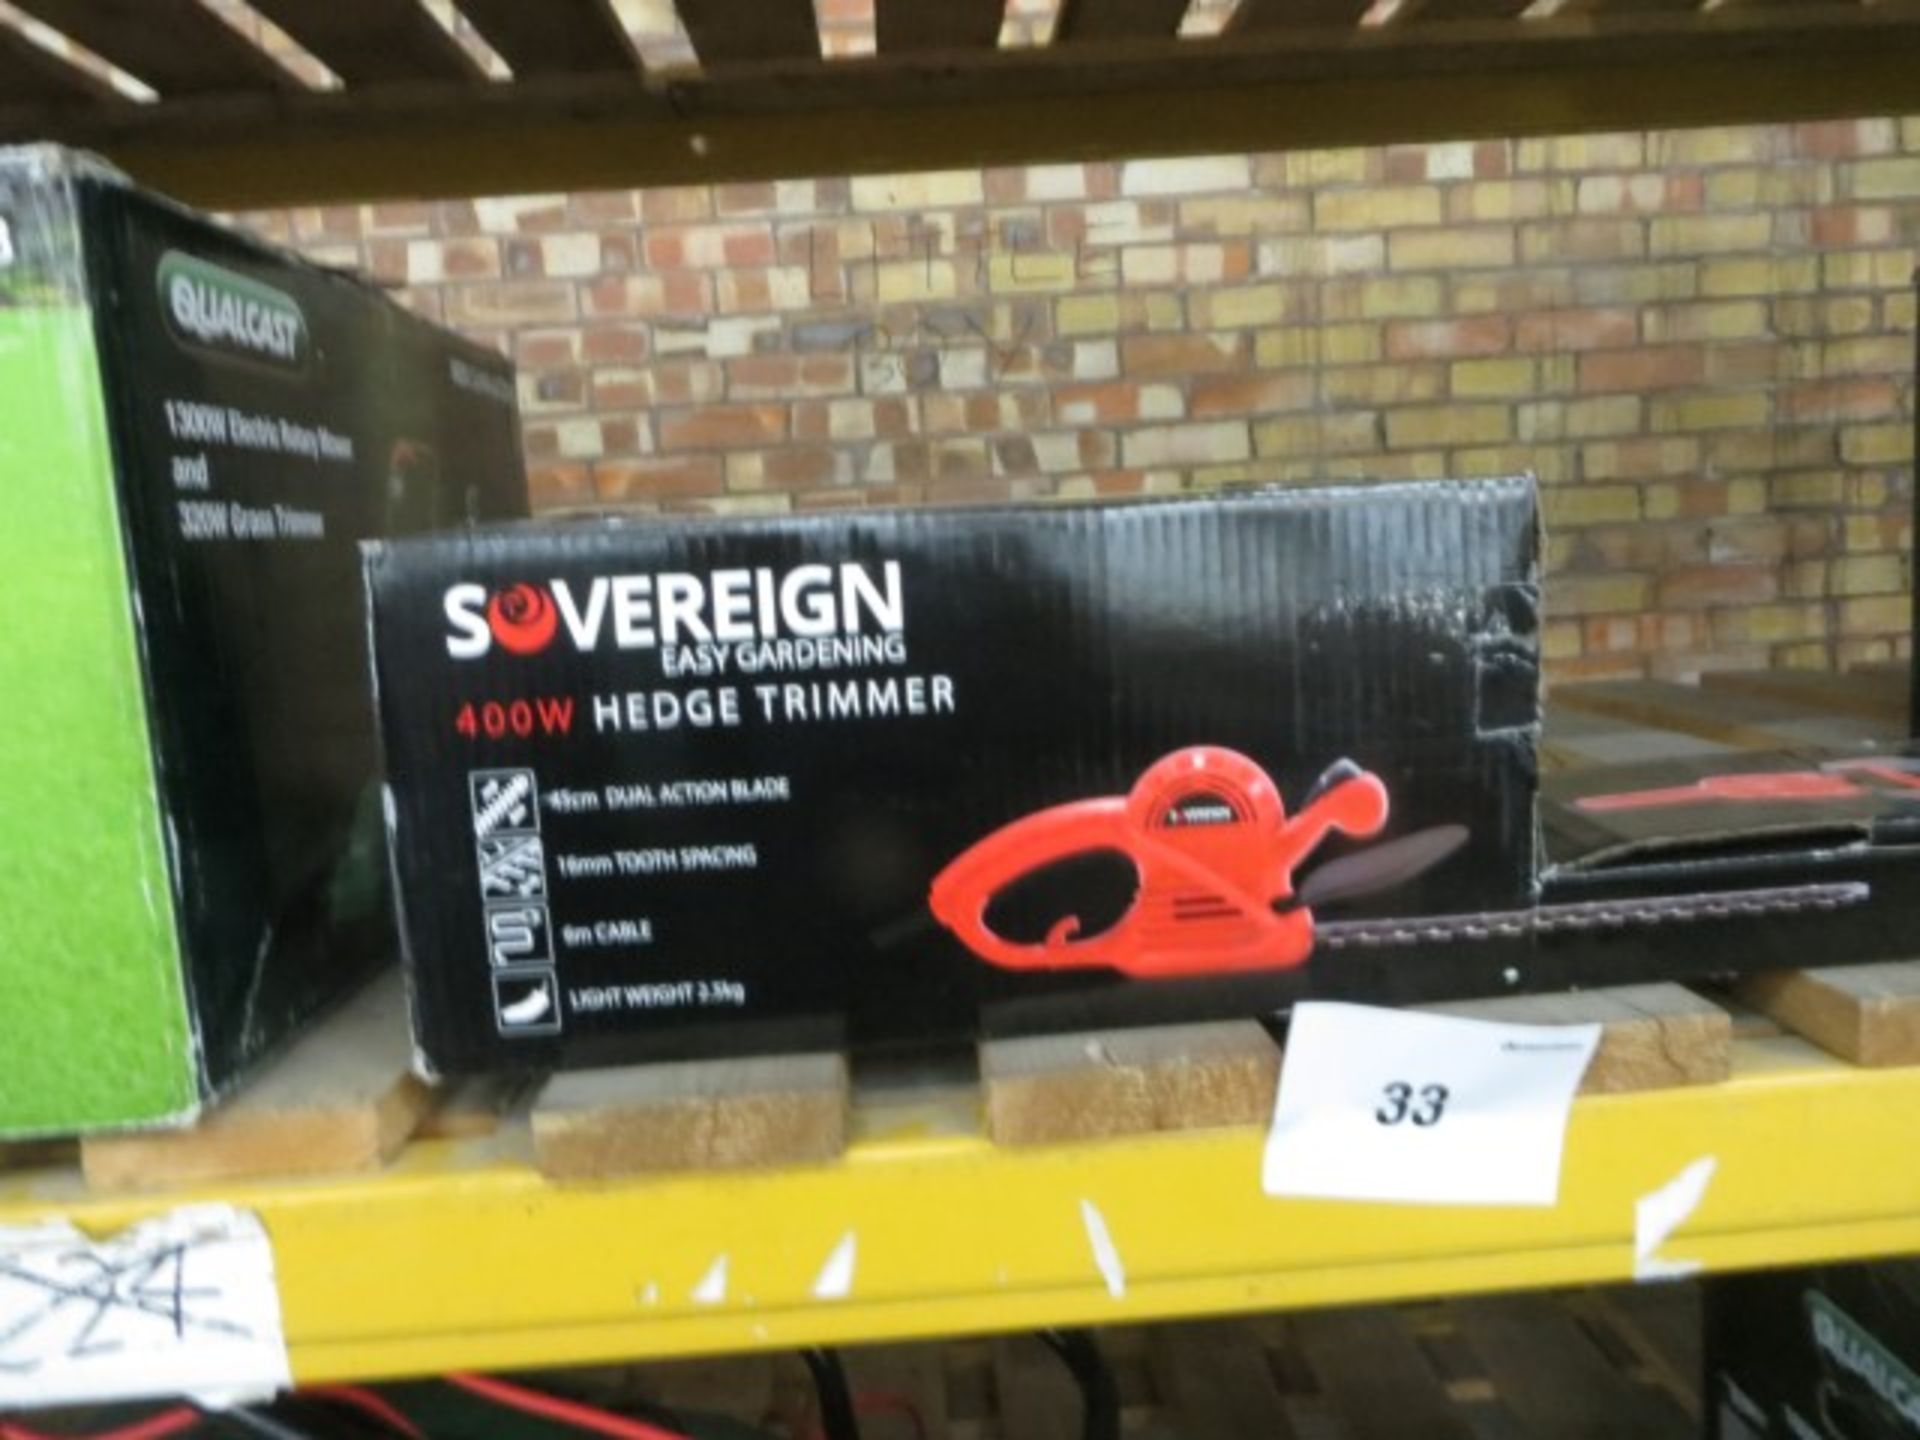 SOVEREIGN 400W HEDGE TRIMMER